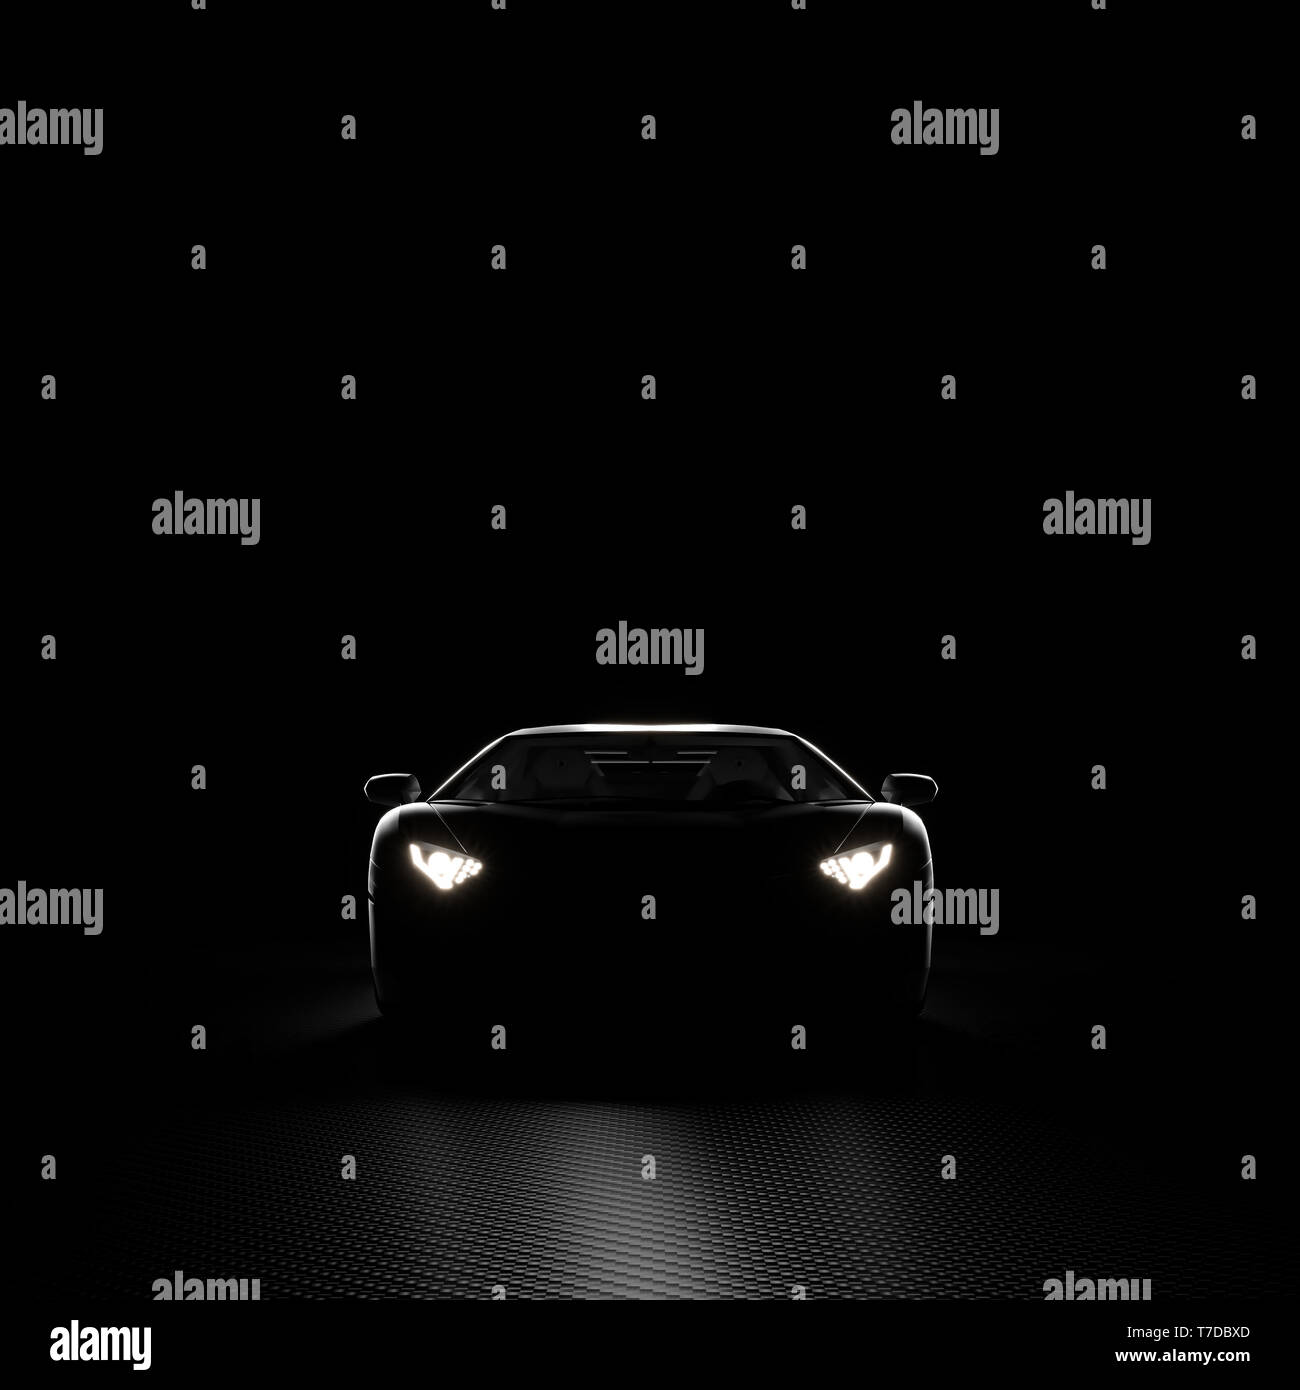 3d render image of a sports car with its headlights on. Dark background with carbon fiber texture. Front view. Stock Photo